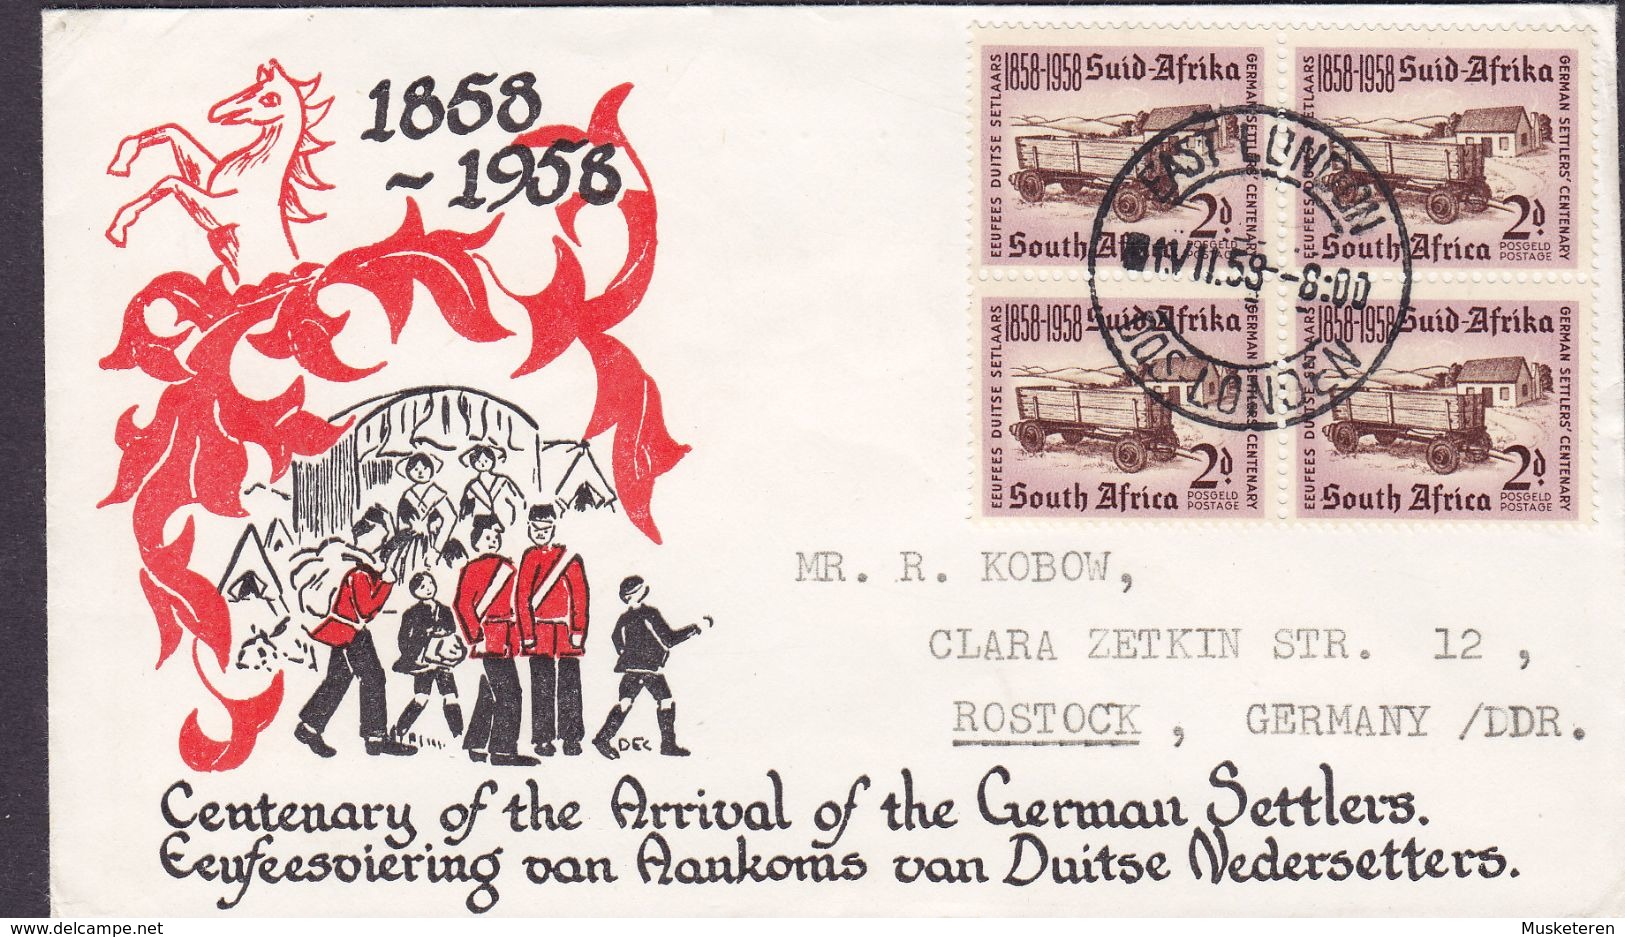 South Africa 1958 FDC Cover German Settlers Centenary 4-Block - FDC